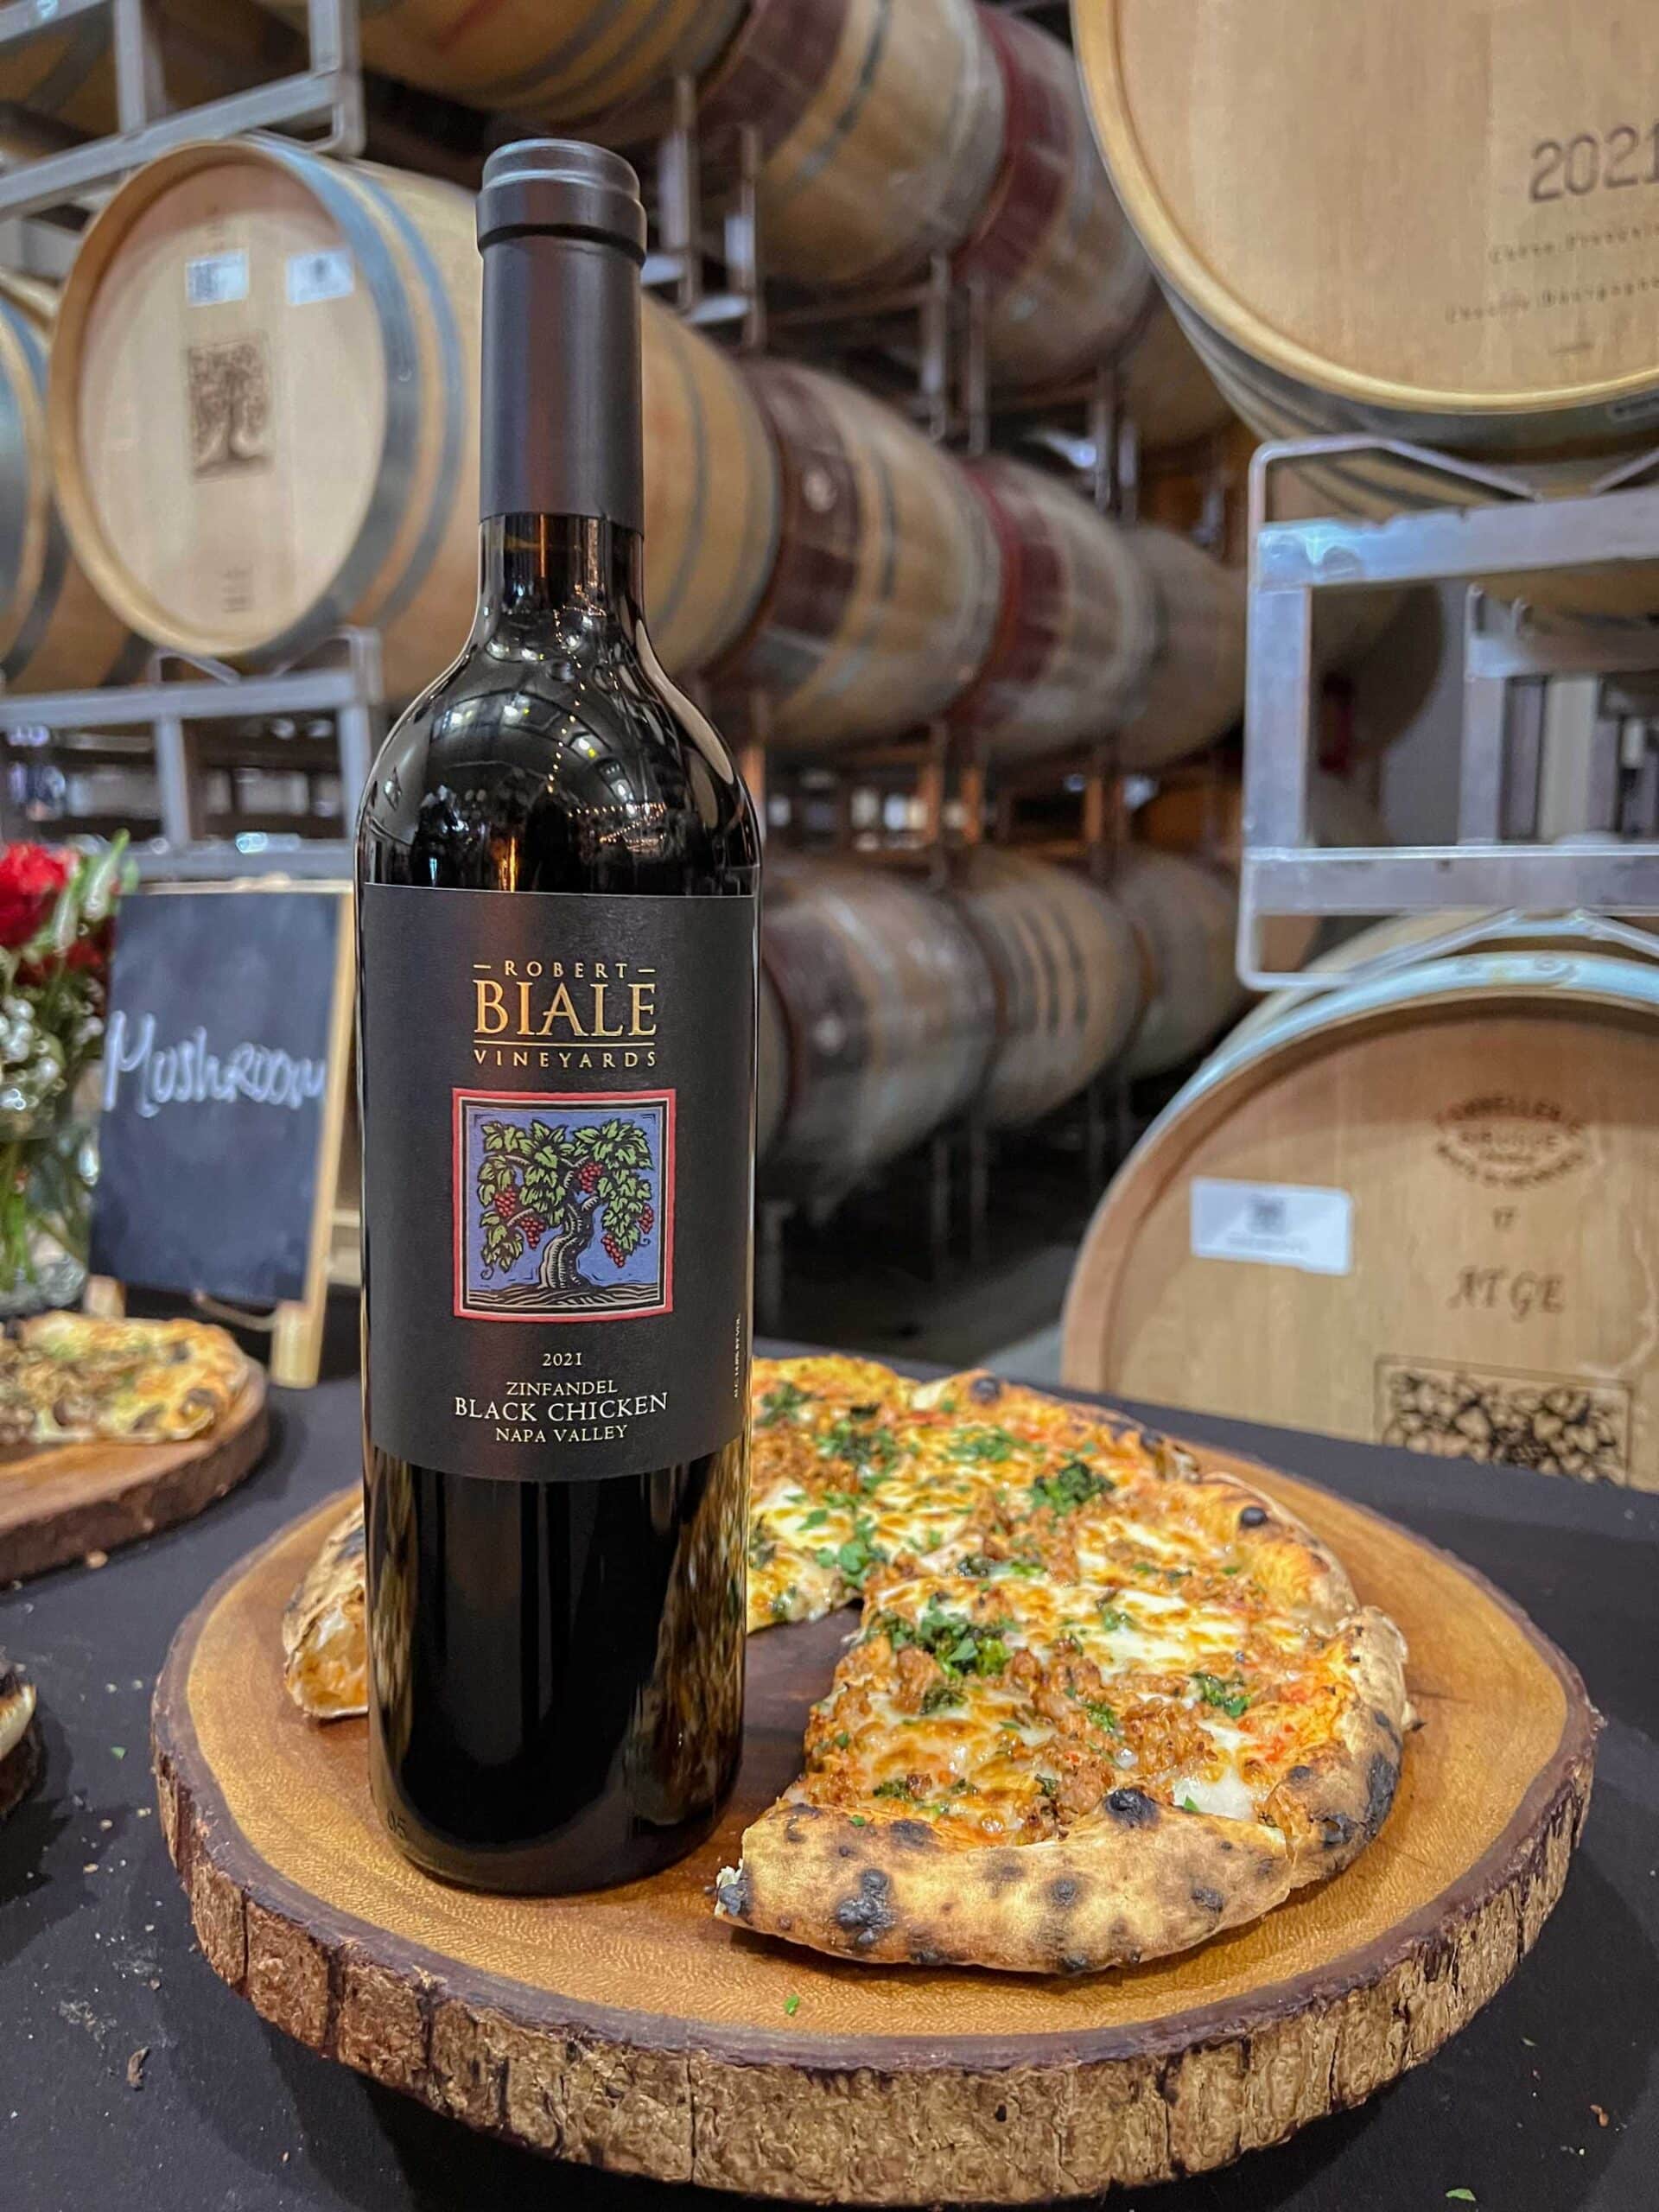 a bottle of Biale Black Chicken Zinfandel beside a pizza in the Biale cellar with barrels in the background